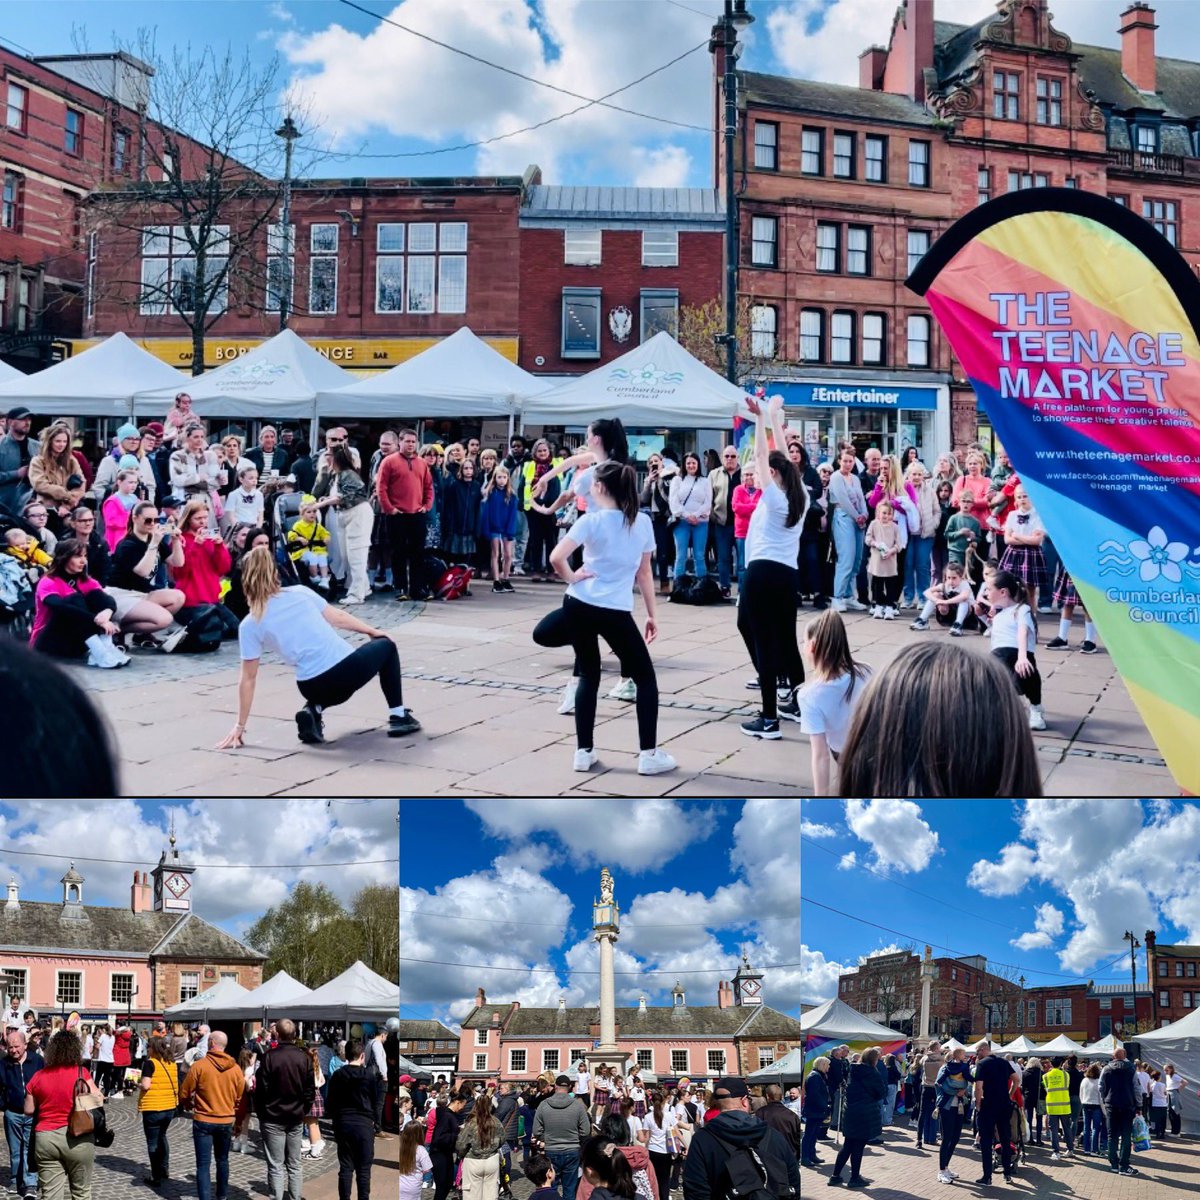 My daughter performed in the opening dance at today’s Teenage Market (pictured below). Proud parent moment. 🧡🥰👏 Such a fantastic market and event that encourages young people to be entrepreneurs and making their passion a business. #teenagemarket #youngpeople #cumbria